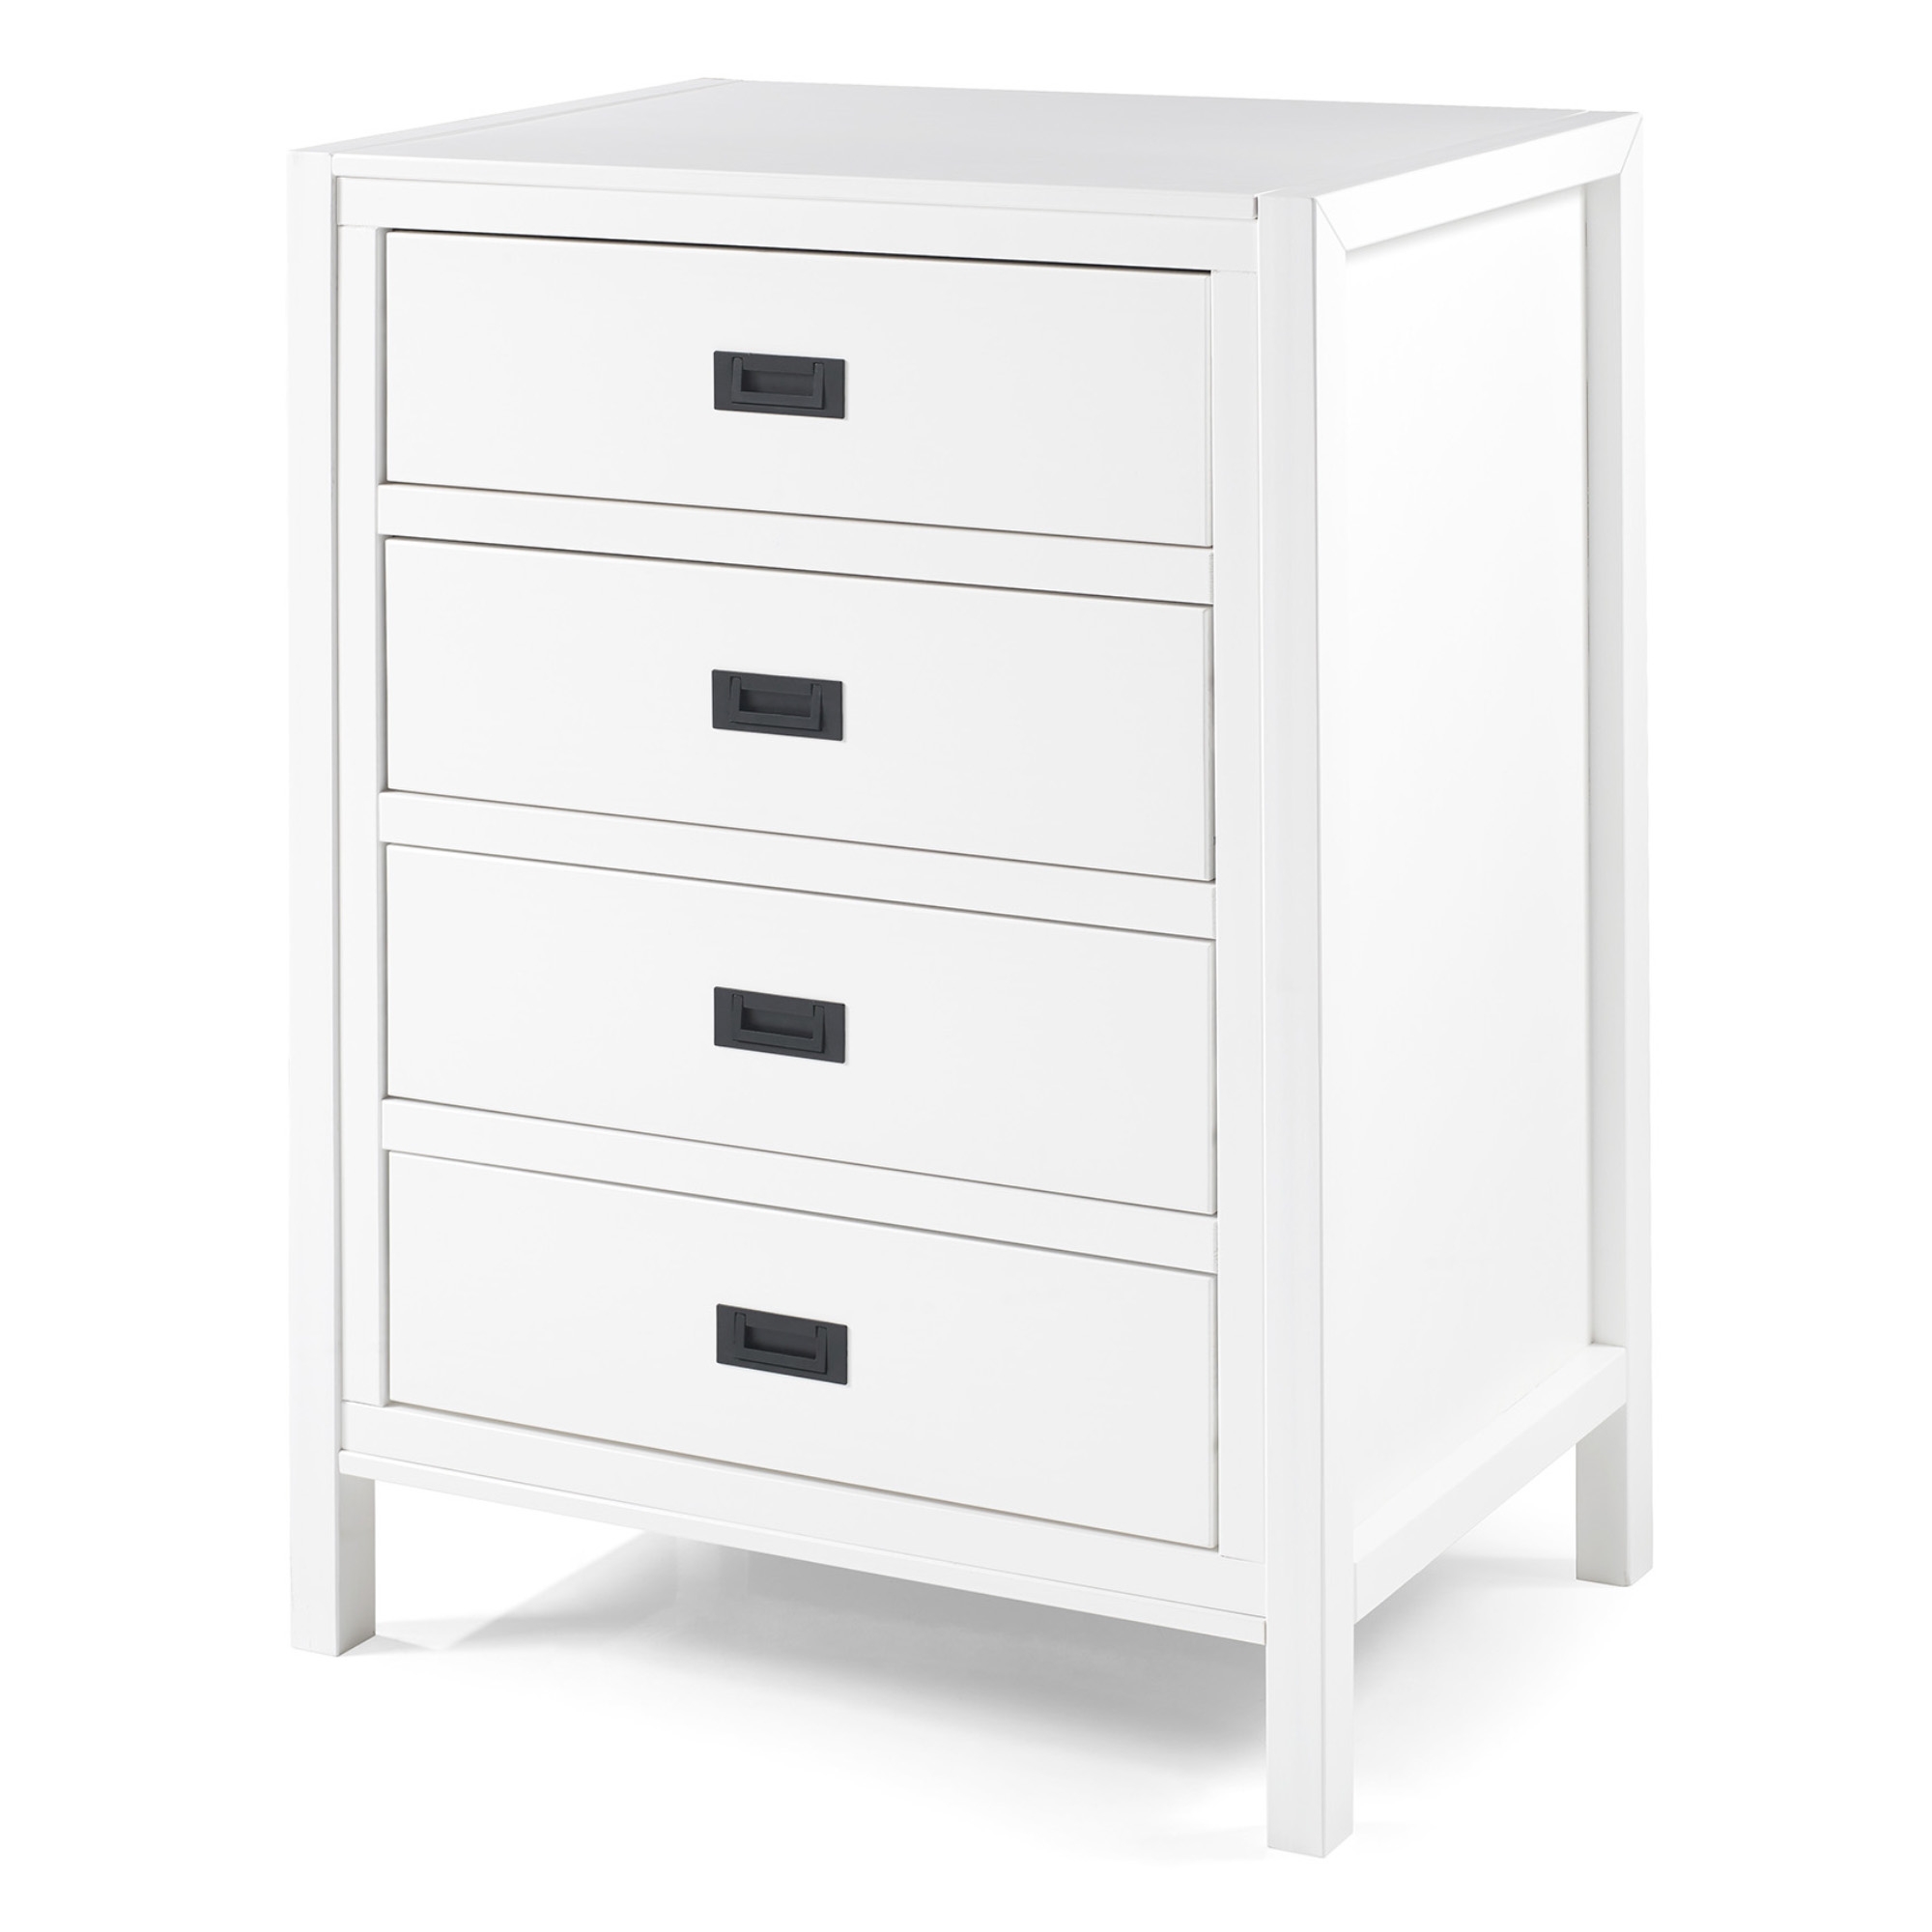 Lydia 40" Classic Solid Wood 4 Drawer Chest - White - Image 2